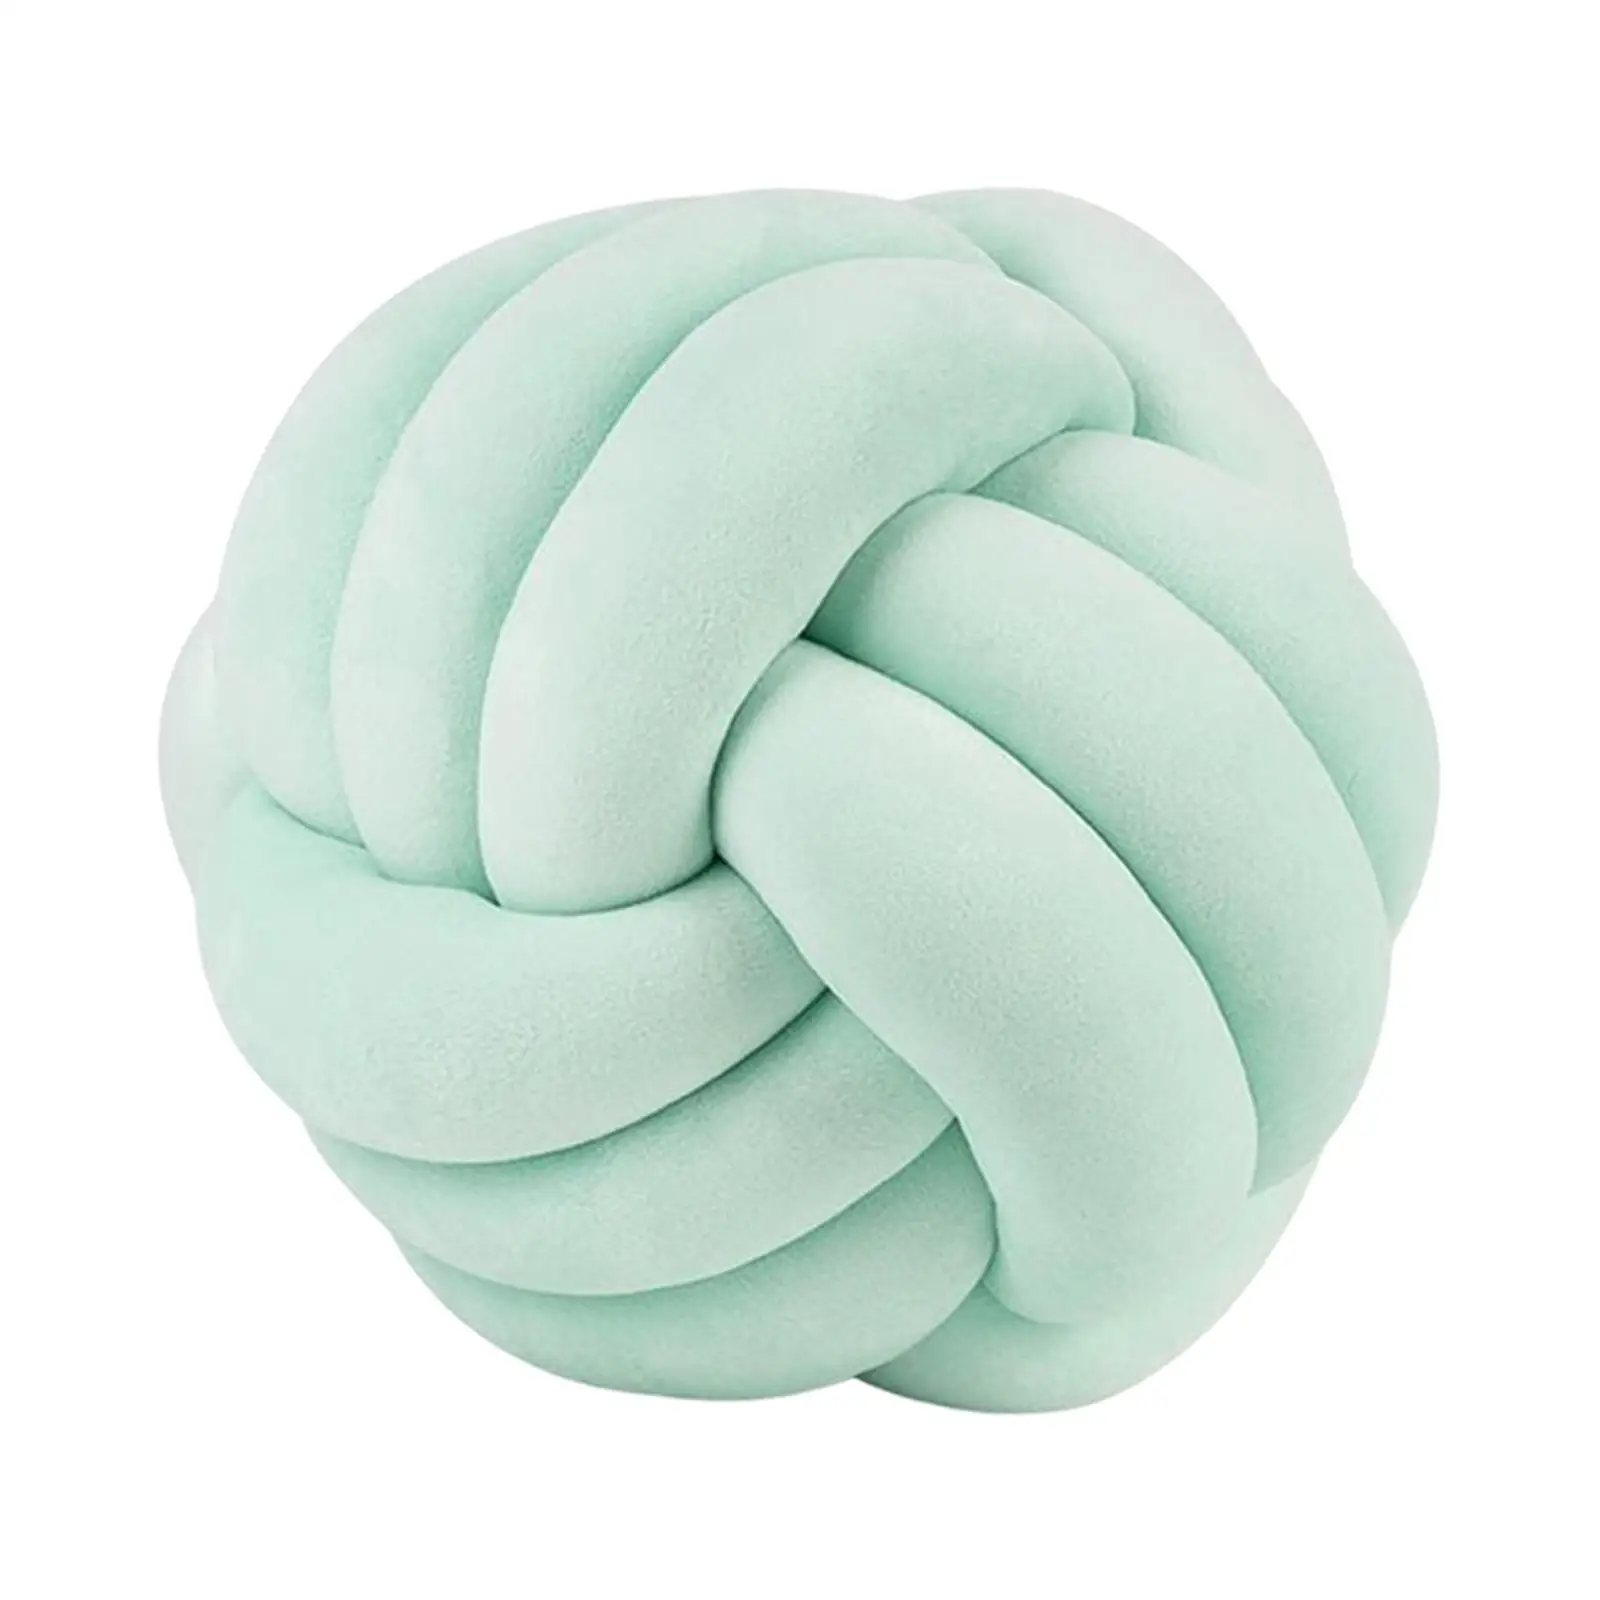 Round Knot Ball Pillow Throw Knotted Pillow Handmade Decorative for Chairs Home Decoration